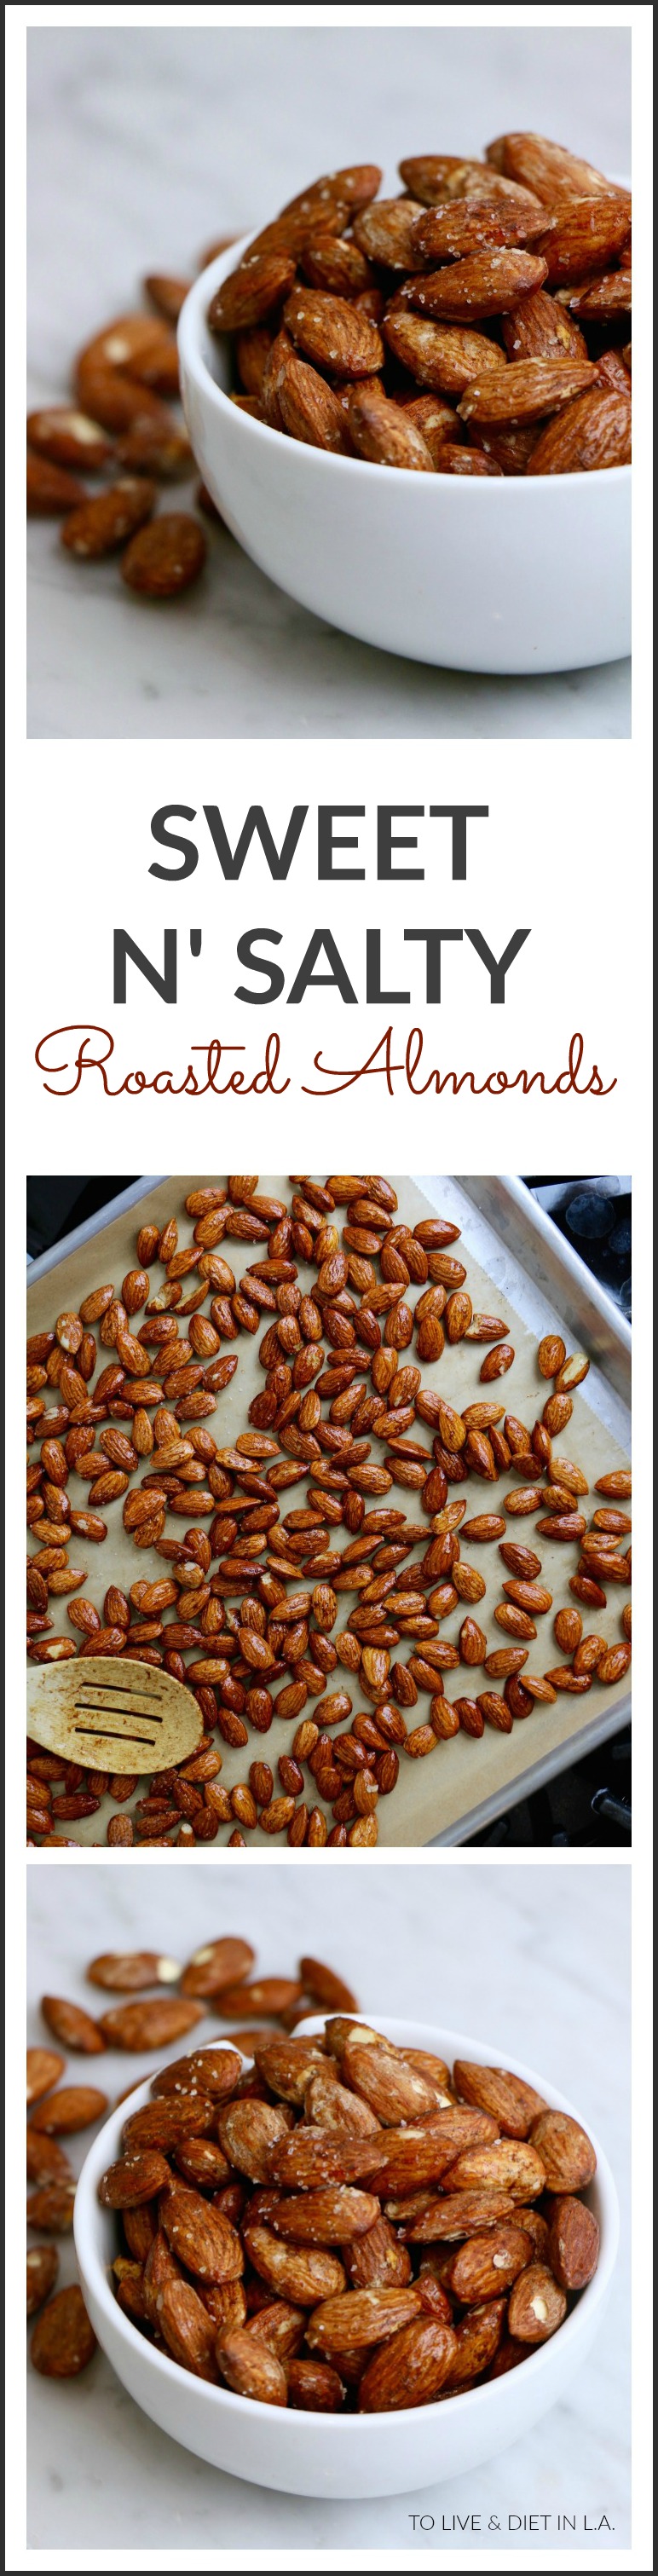 Sweet N' Salty Roasted Almonds - homemade roasted almonds sprinkled with cinnamon, sea salt and stevia. A quick, easy and healthy snack.